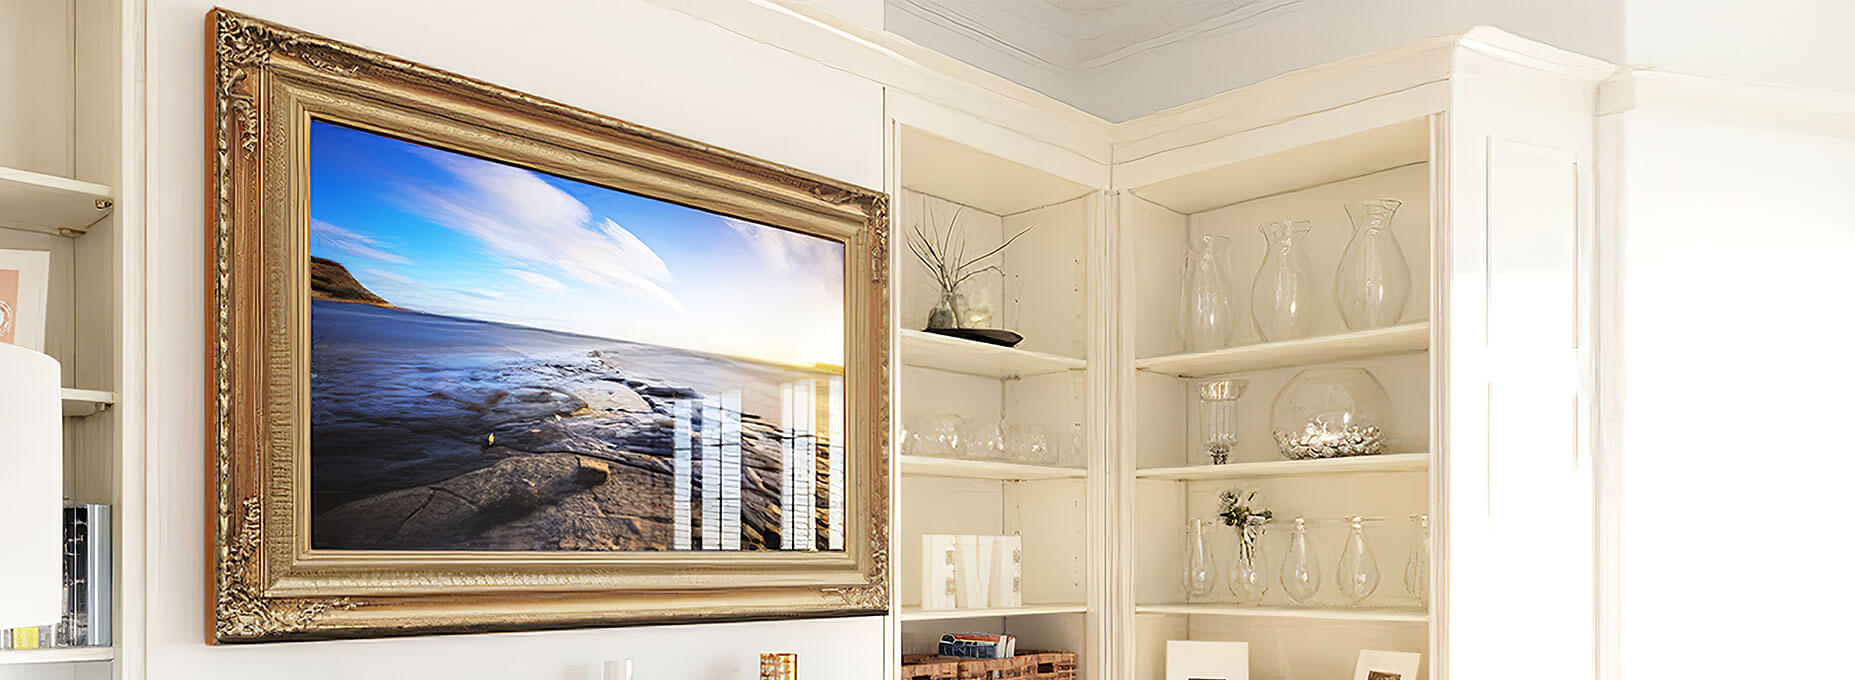 A smart TV framed in gold with classic and intricate designs on four corners attached to a wall in white room.